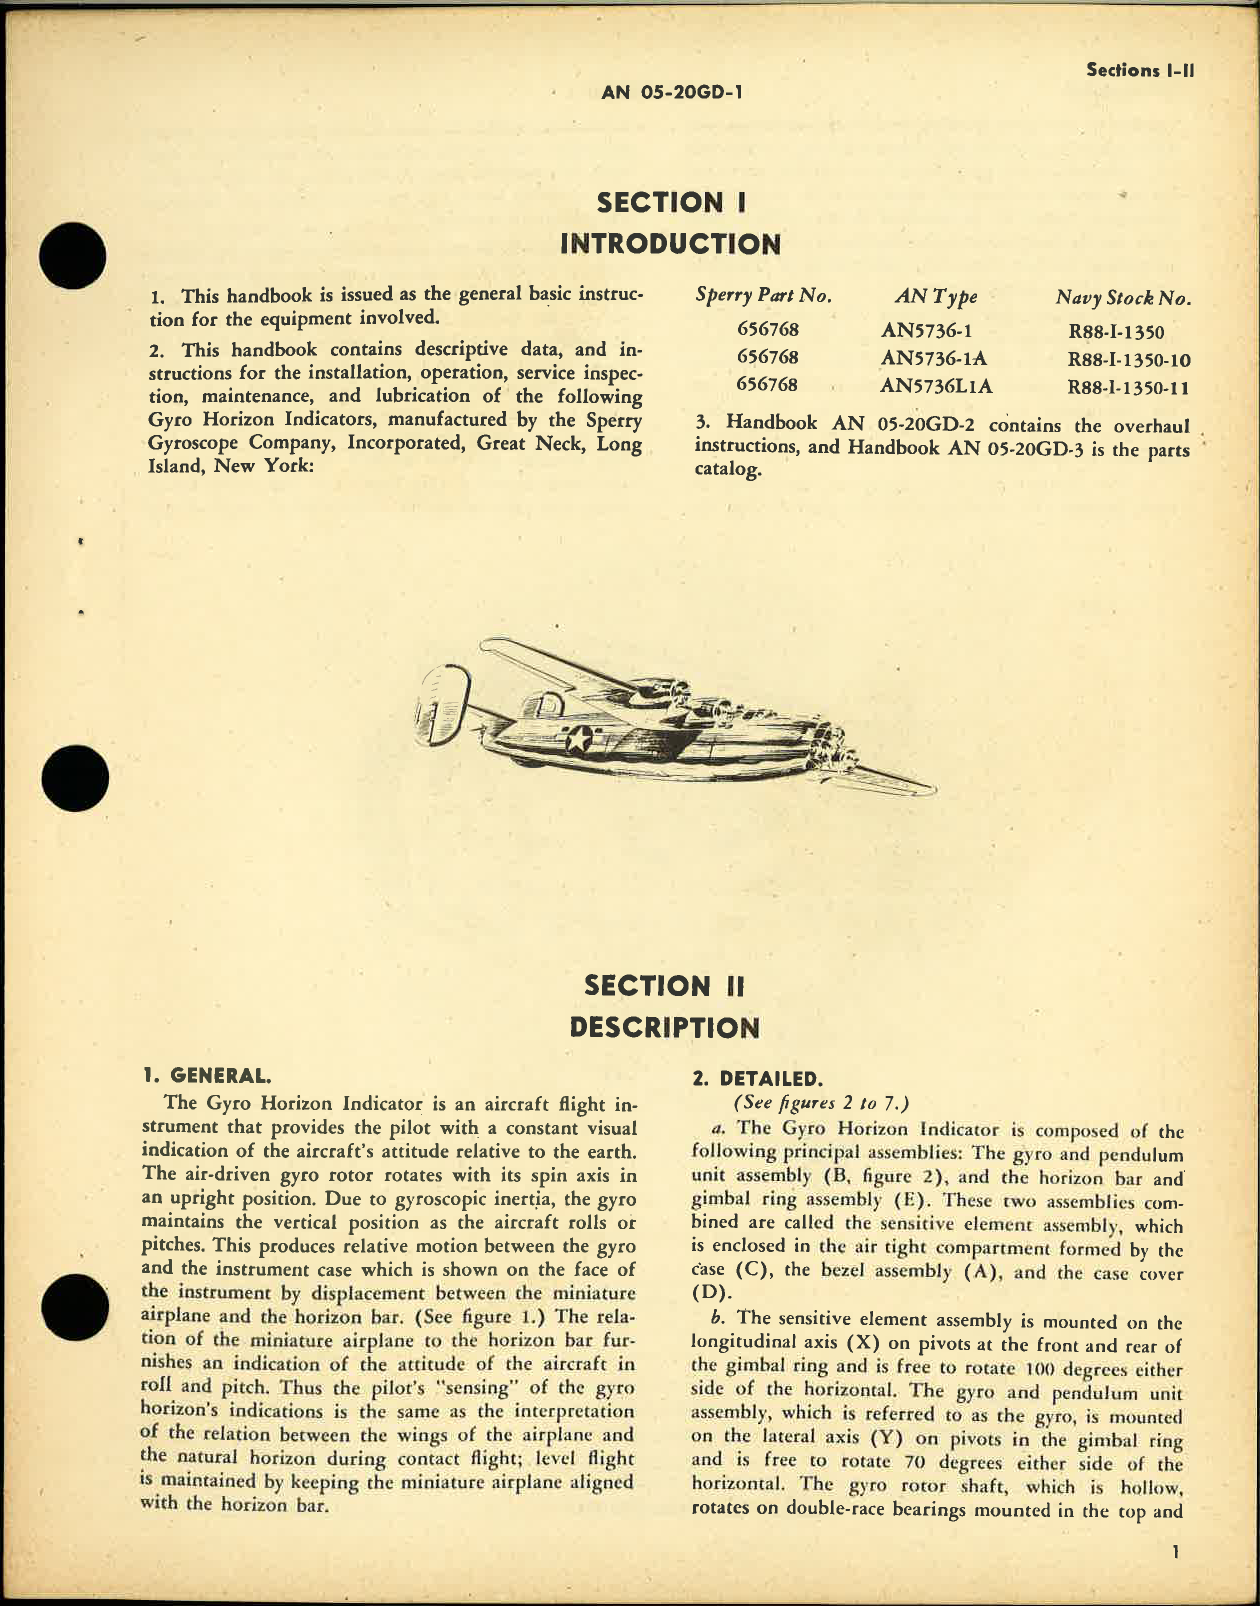 Sample page 5 from AirCorps Library document: Operation and Service Instructions Gyro Horizon Indicators